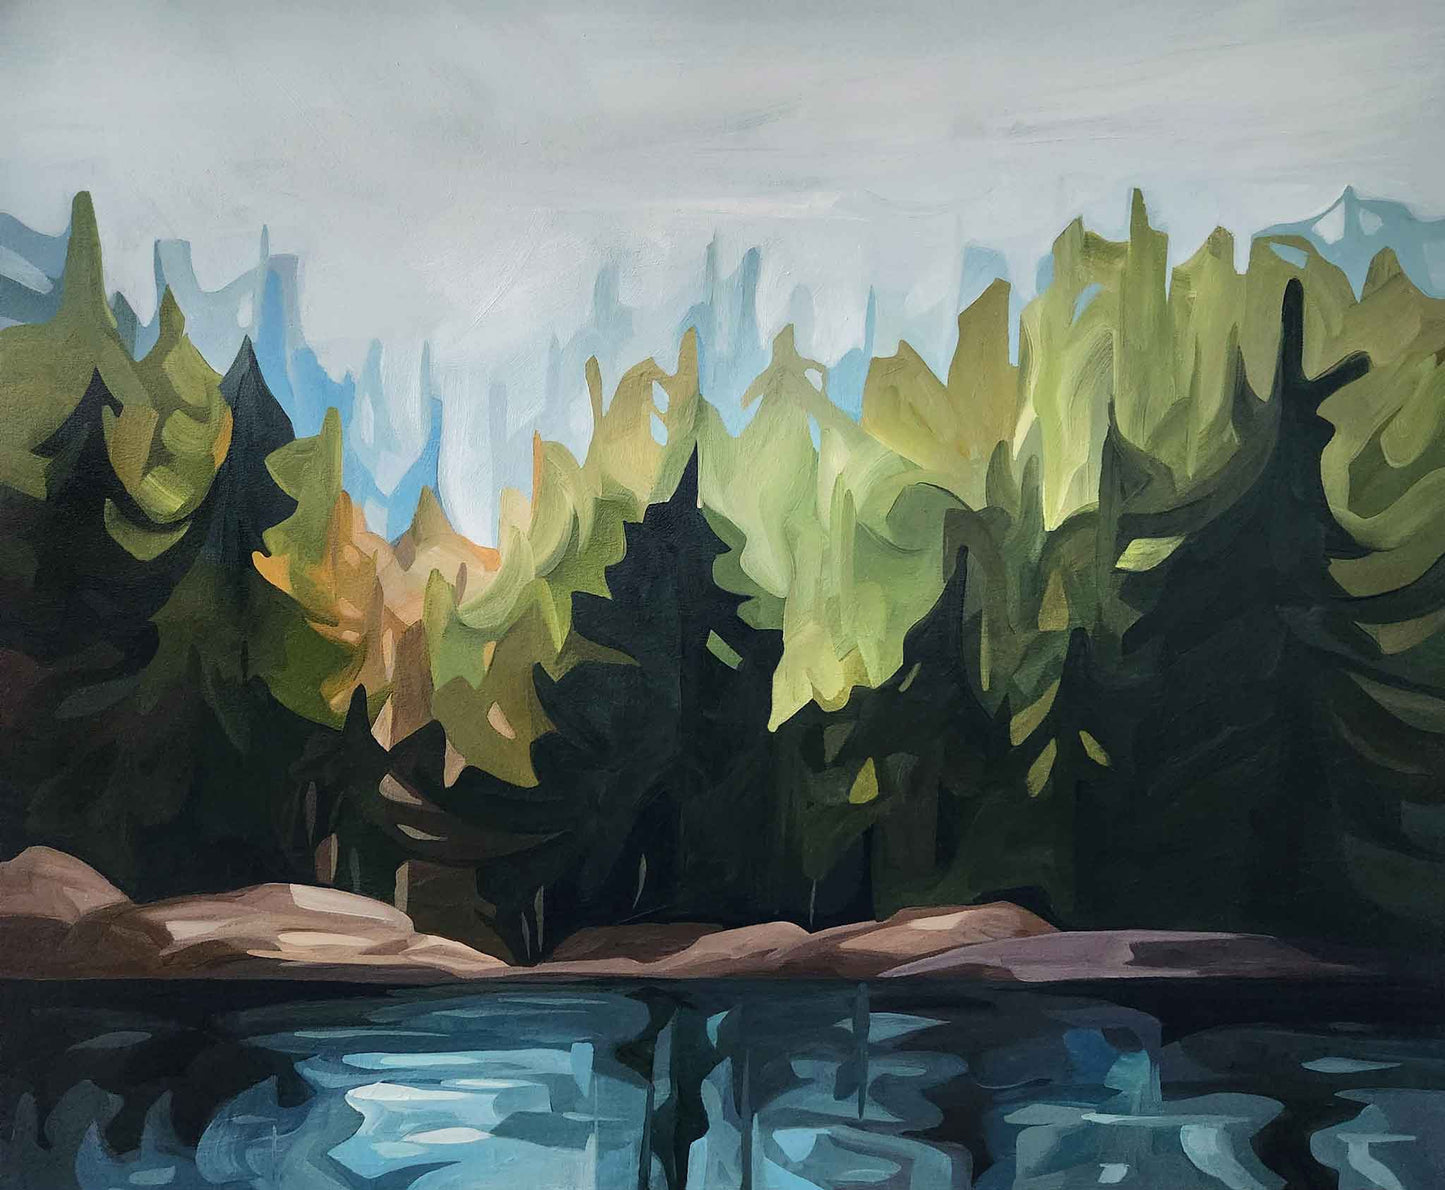 ‘Lake of the Woods’, an acrylic landscape painting of a quiet lake in the forest, shows the beauty and tranquility of nature